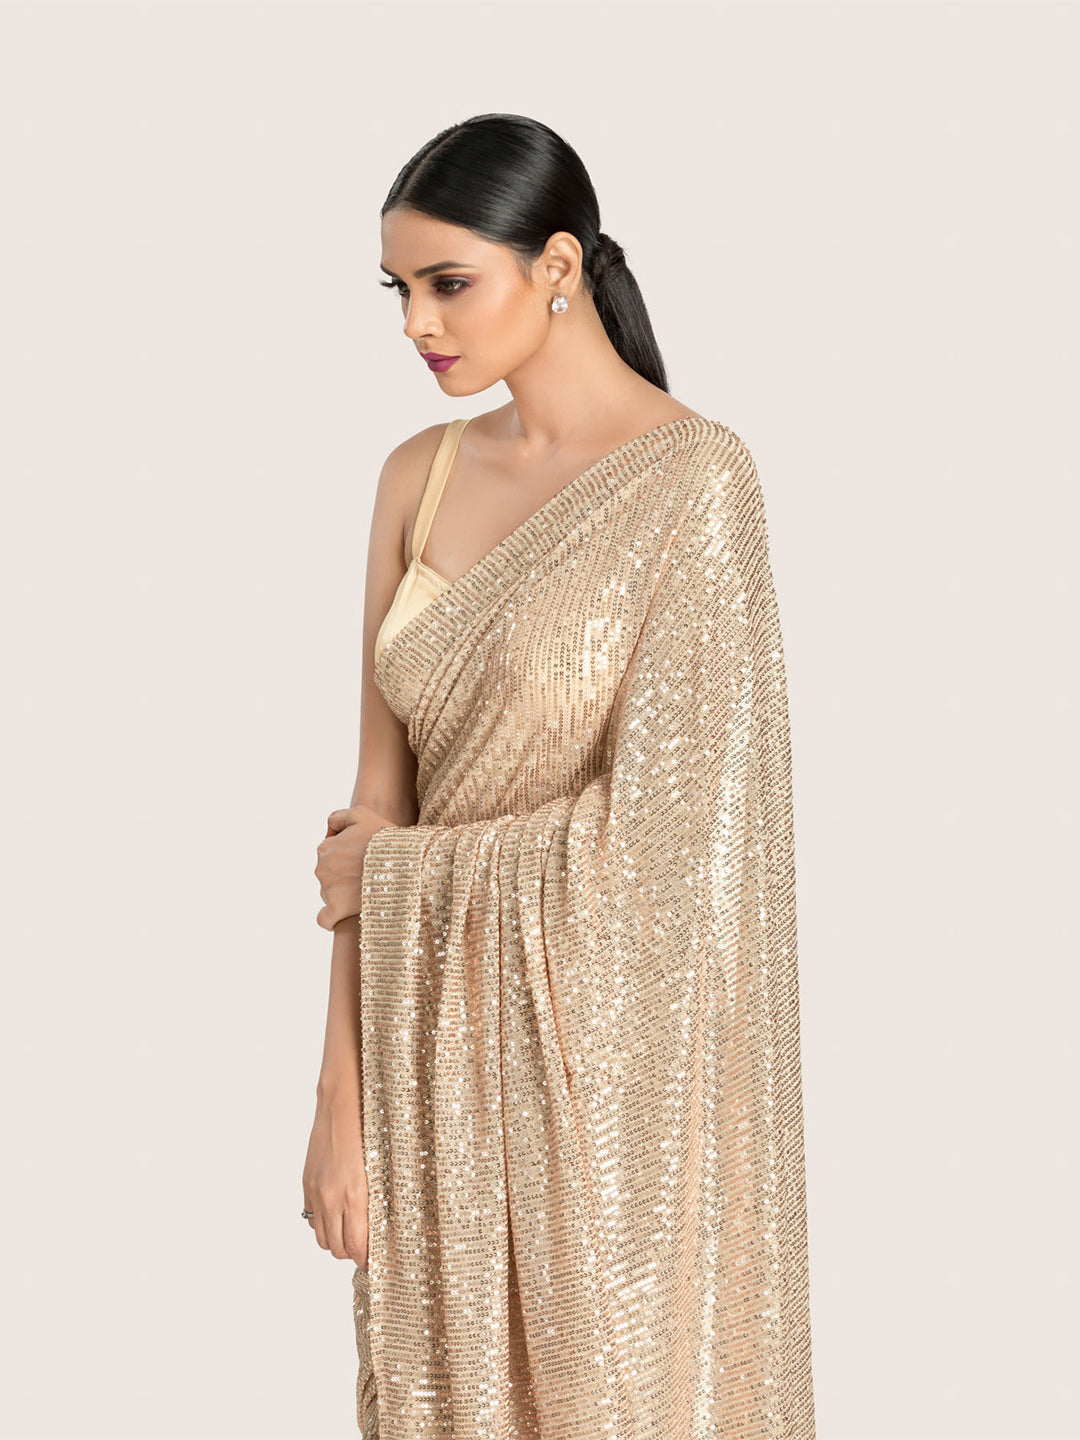 Peach Sequins Saree With Blouse Fabric